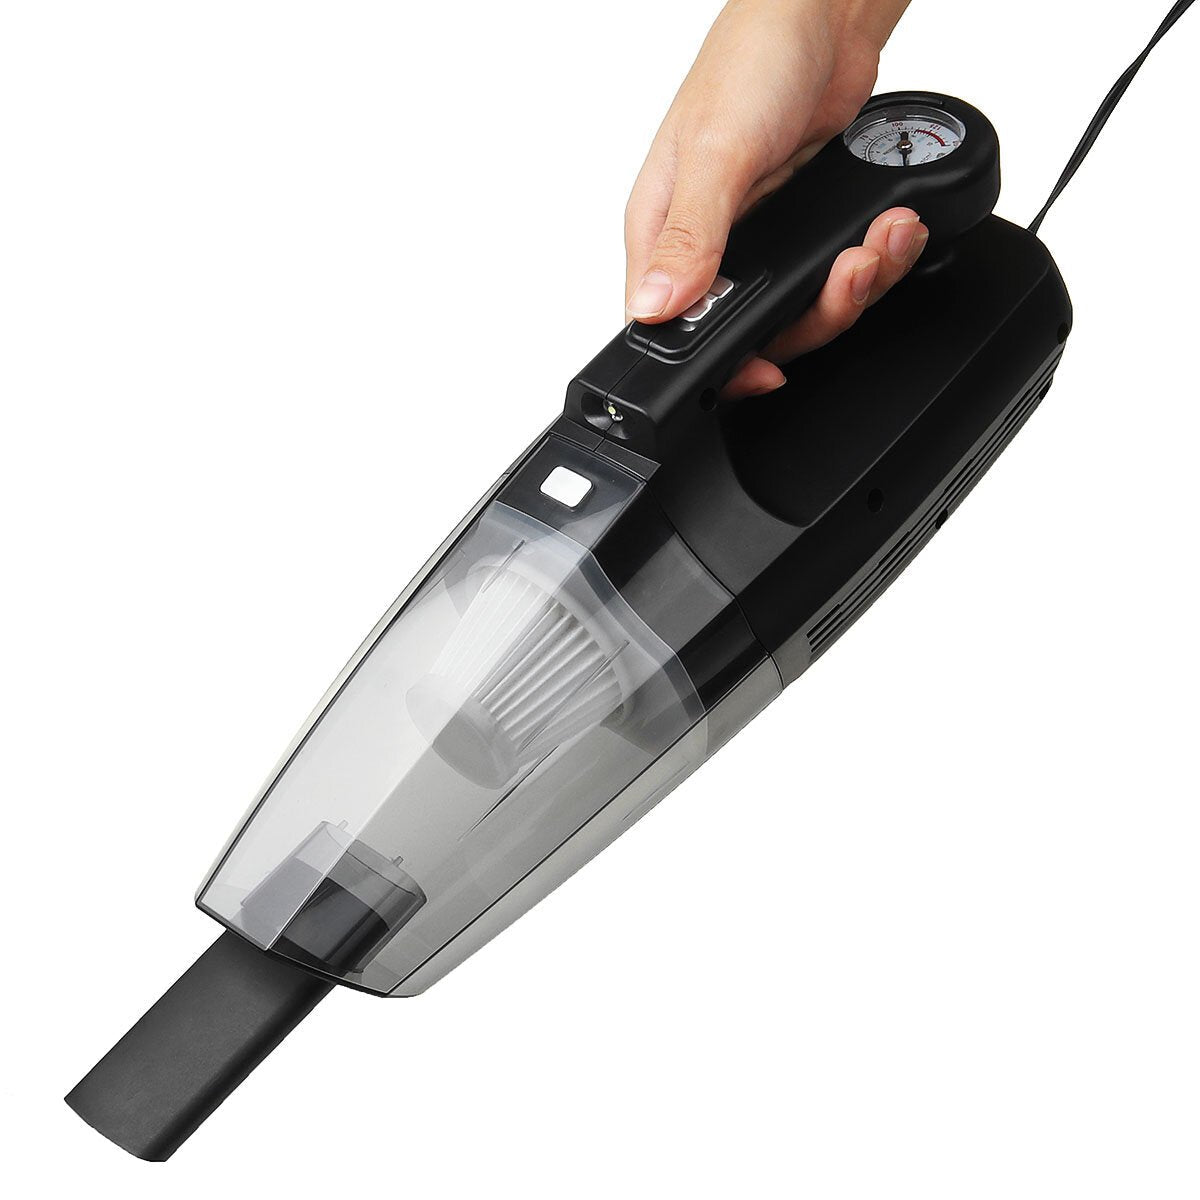 120W Wired Handheld Vacuum Cleaner Inflator Vehicle Air Pump 120W 4500Pa 22800rmp Strong Suction for Car Home